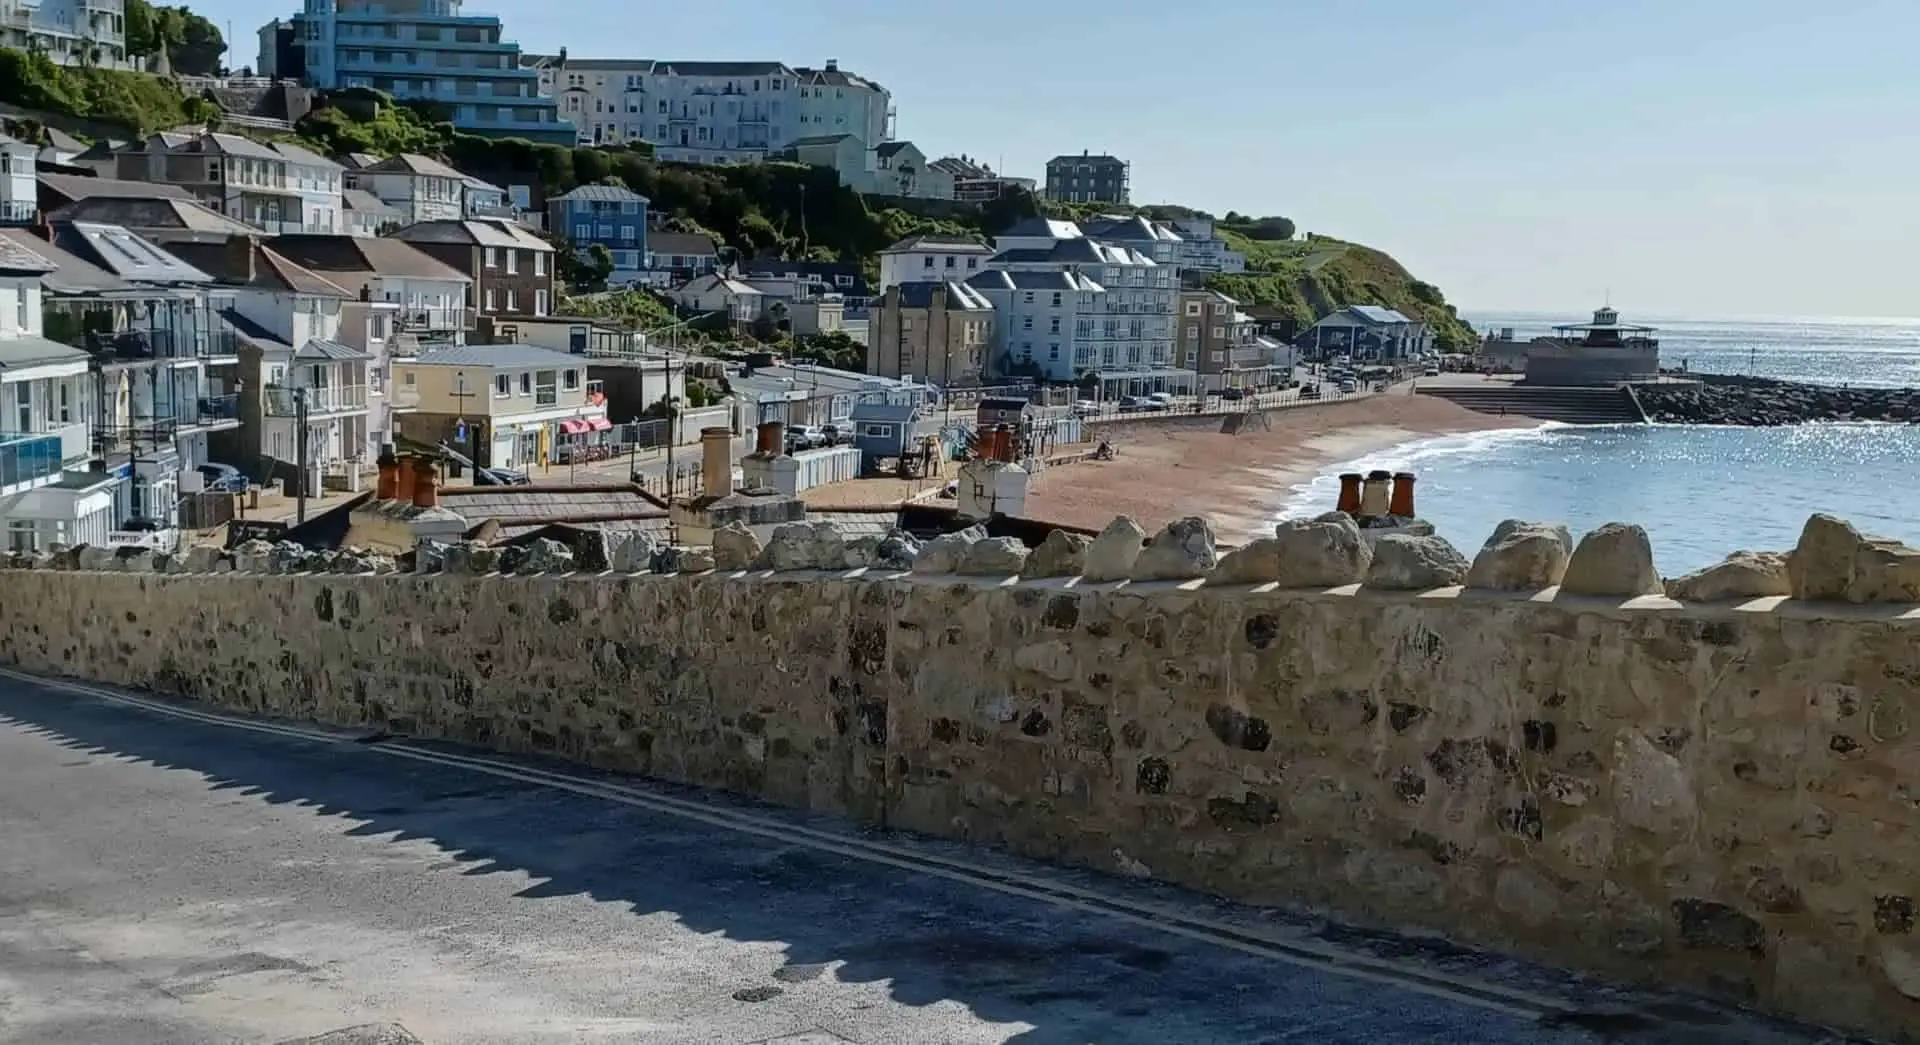 The renovated wall in Ventnor